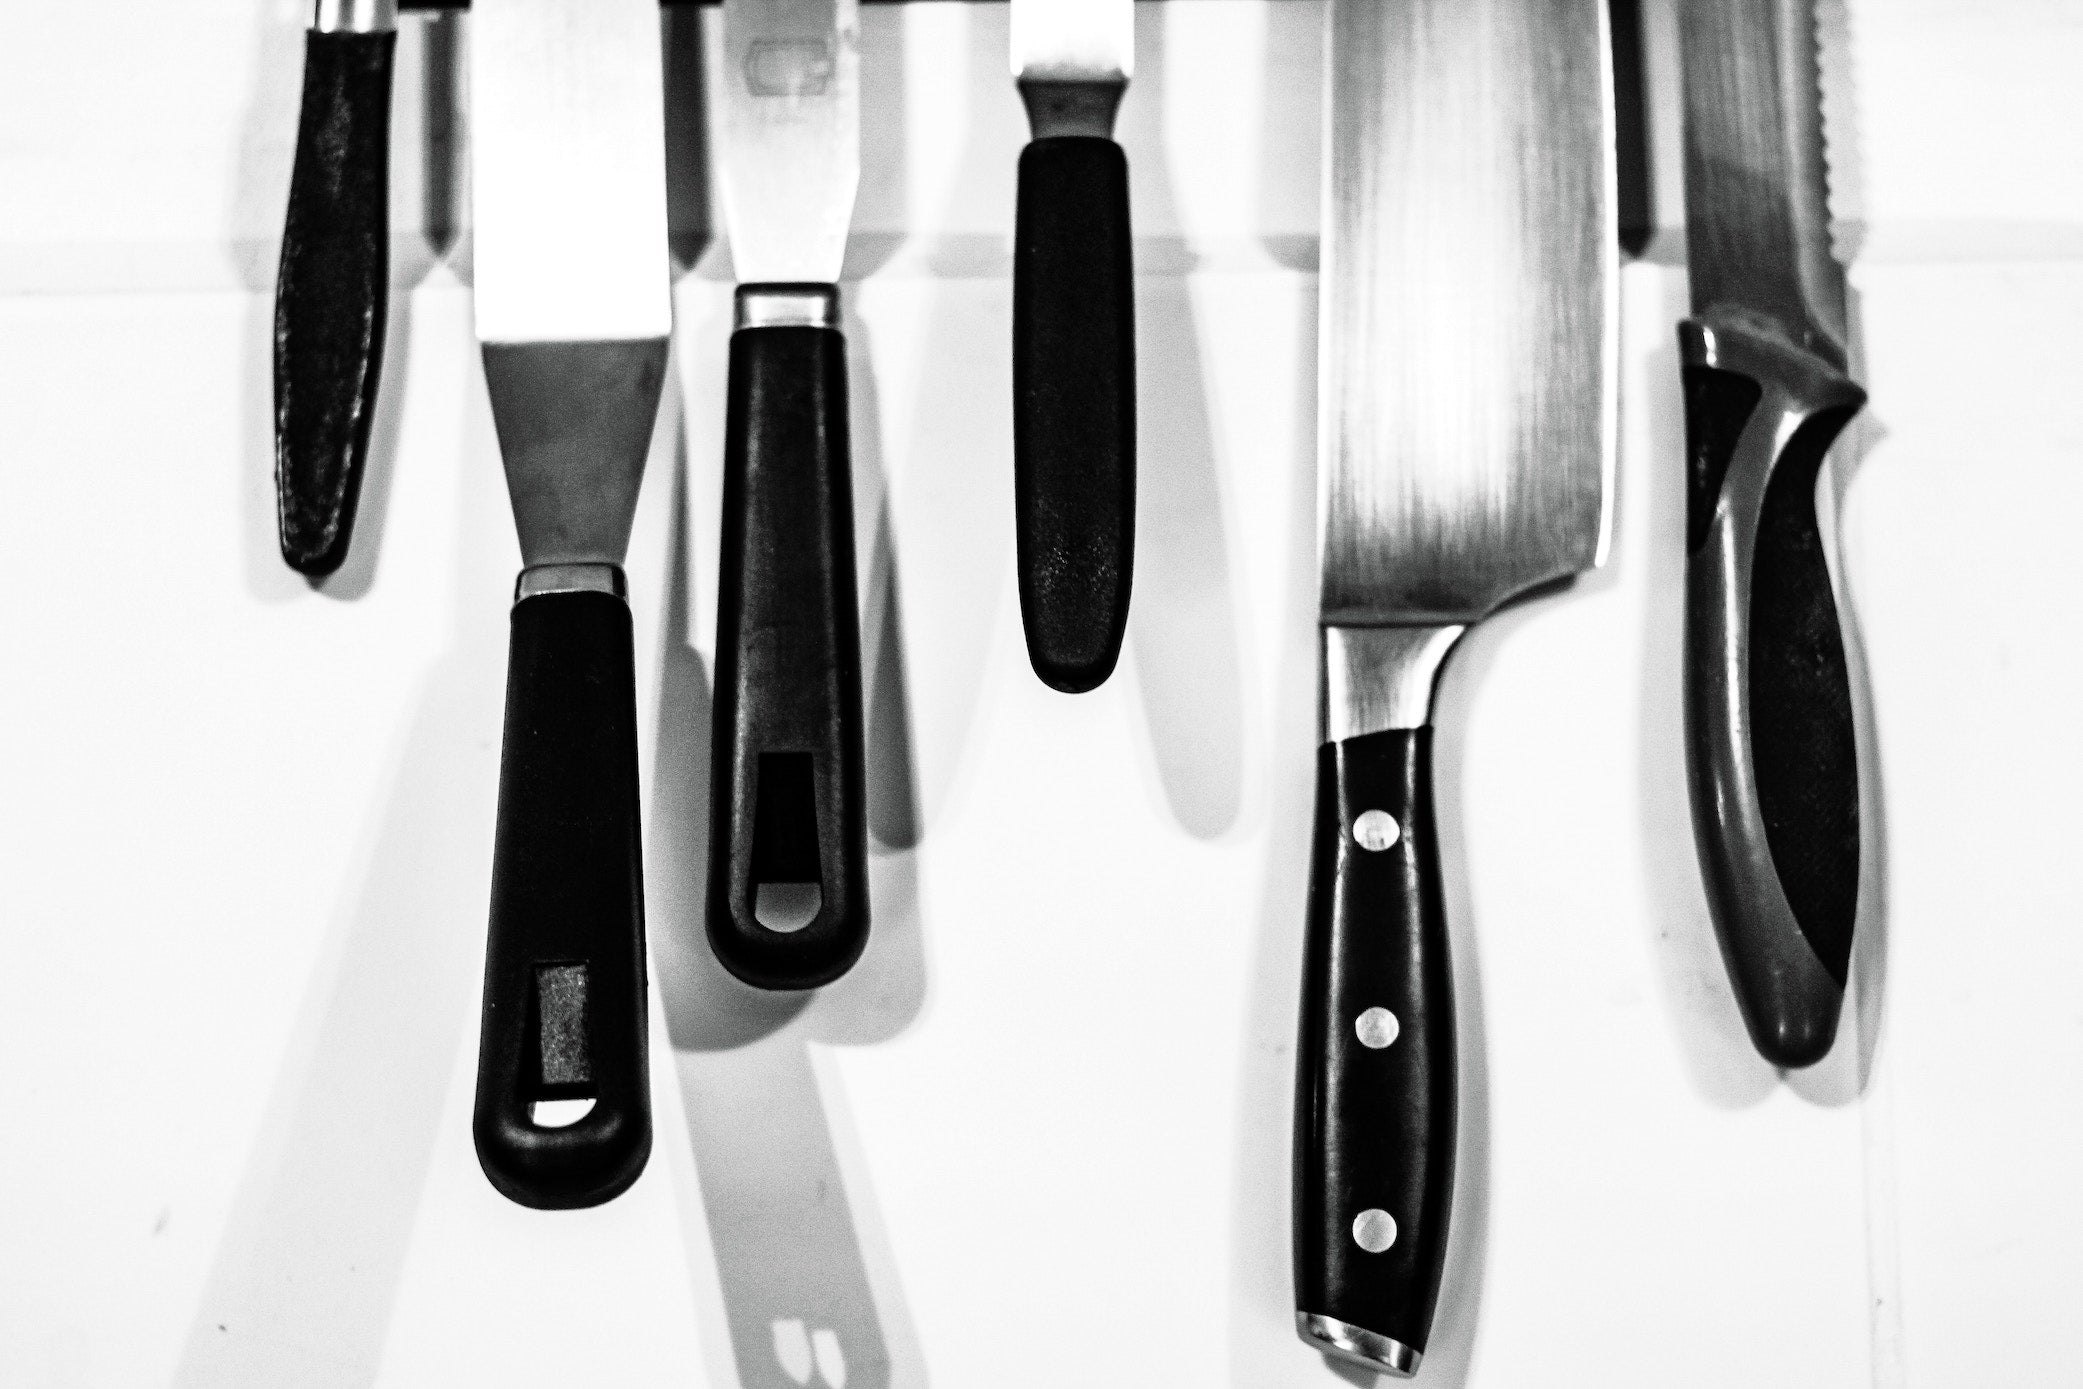 Made In vs. Misen: Which Knives Are Better? (10 Differences) 